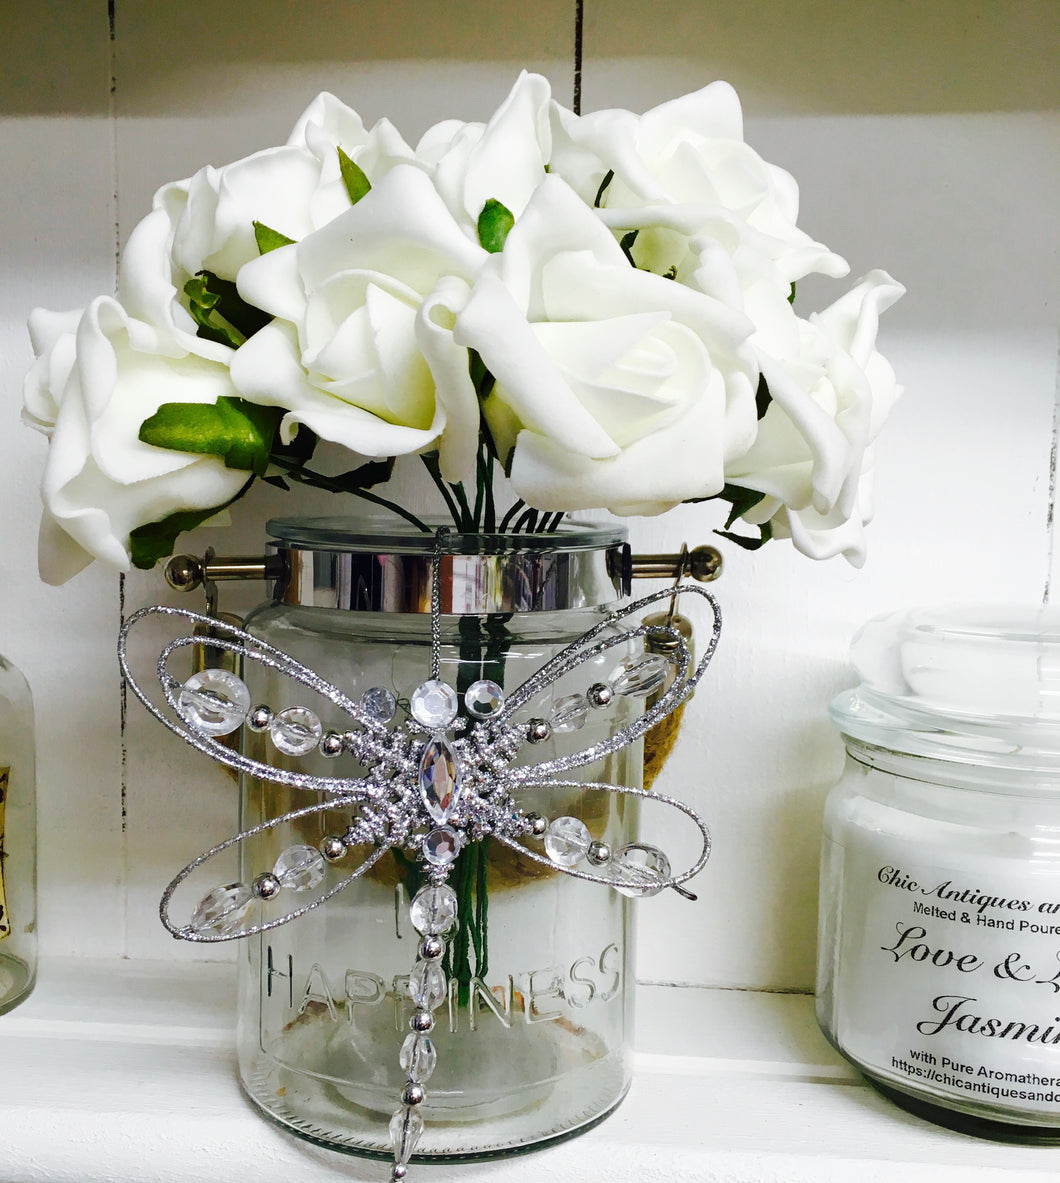 Vase with Artificial White Roses, Dragonfly, Home is Happiness